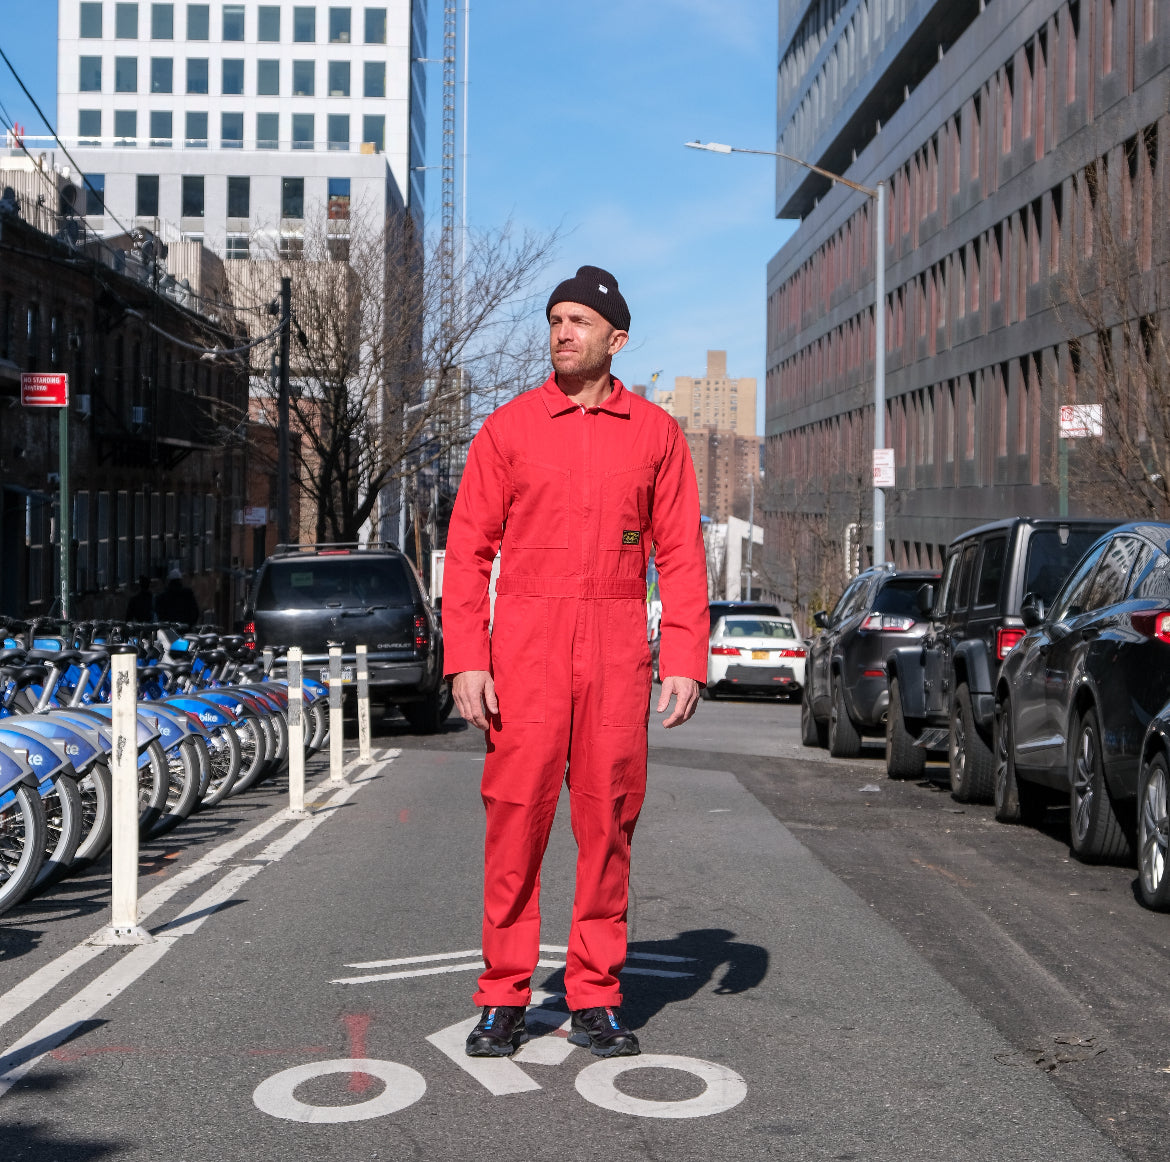 Red Garment Dyed Coveralls